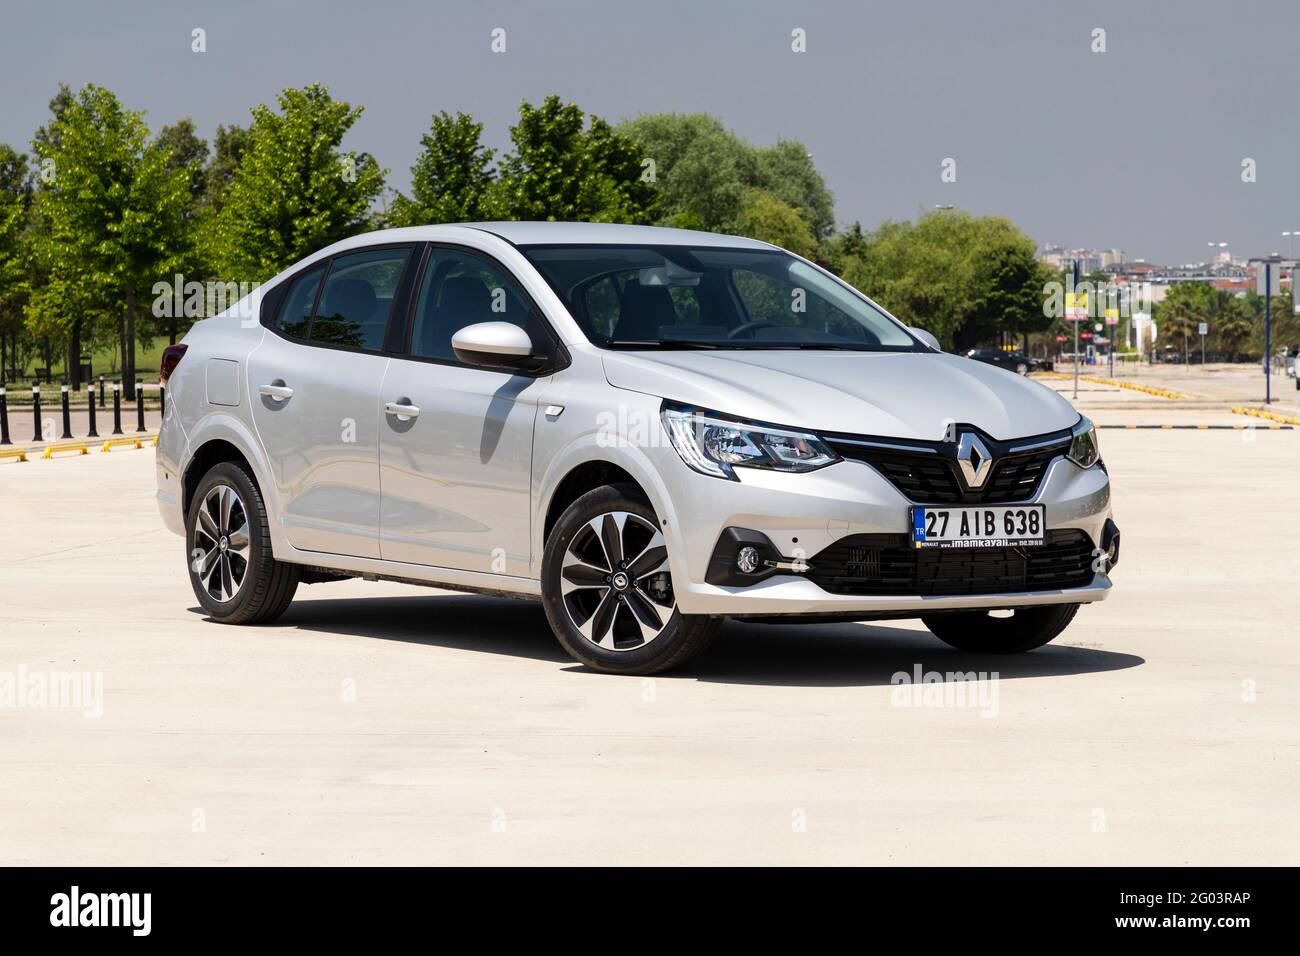 Renault Taliant is a subcompact sedan  produced by French car manufacturer Renault since 2021. It is sharing the same platform with Renault Symbol. Stock Photo